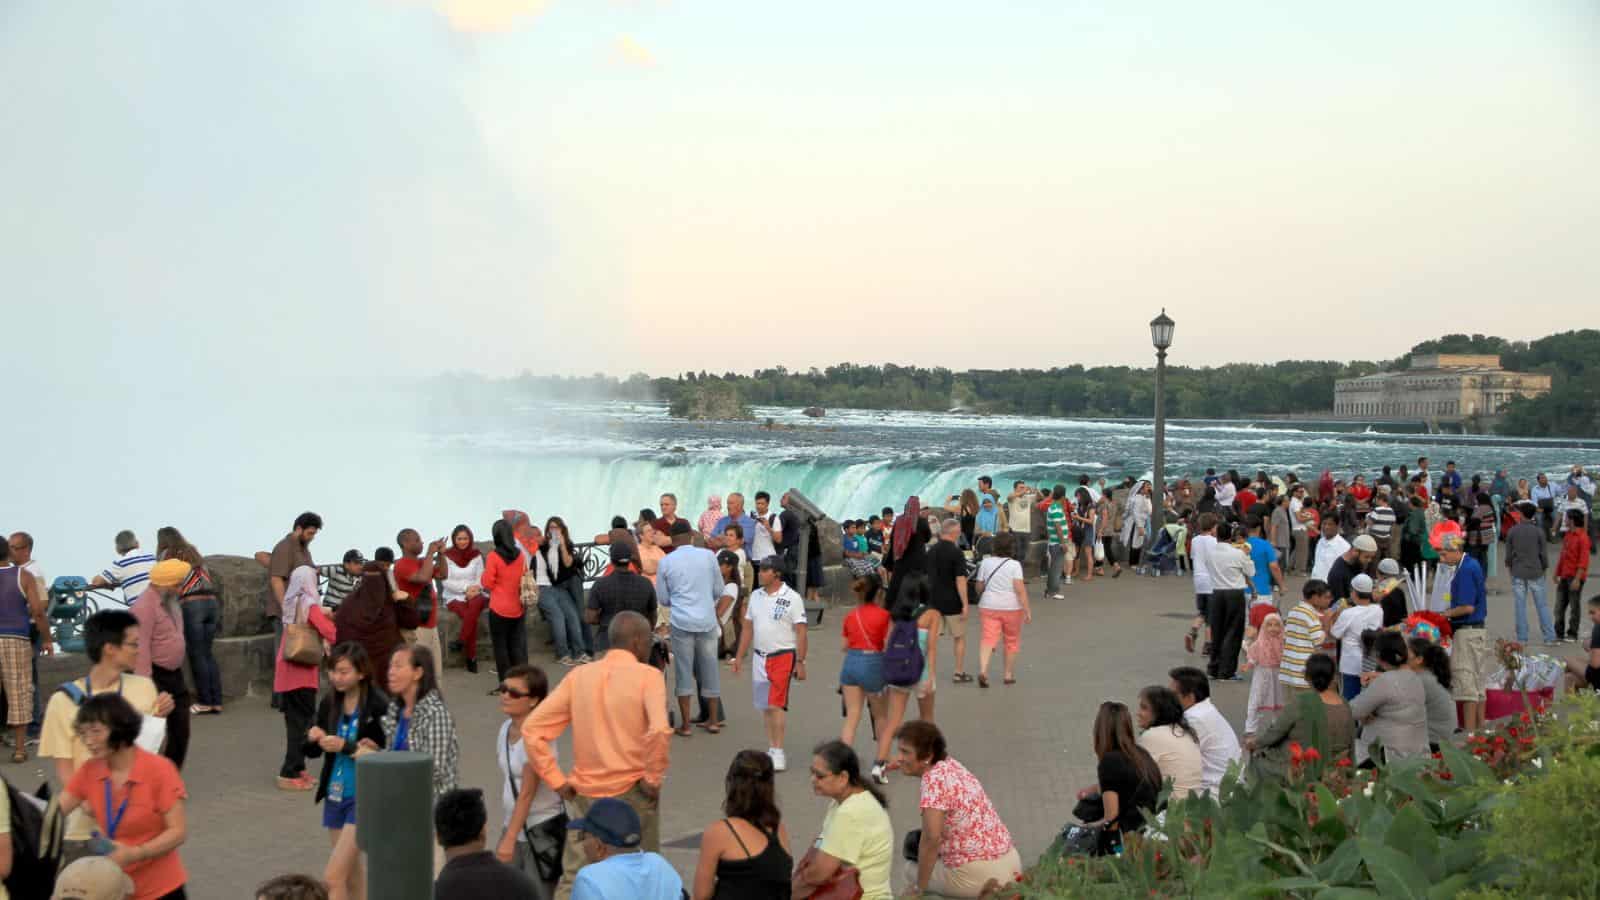 <p>While it’s undeniably a natural wonder, Niagra Falls can be underwhelming. The main issue is the overwhelming commercialization that surrounds the falls. The area is heavily developed with hotels, casinos, and tourist attractions, which can detract from the raw beauty of the falls themselves. </p> <p>Additionally, the sheer number of visitors can make the experience feel crowded and chaotic, especially during peak seasons. If you’re expecting a serene and untouched natural environment, Niagara Falls may not meet those expectations.</p>